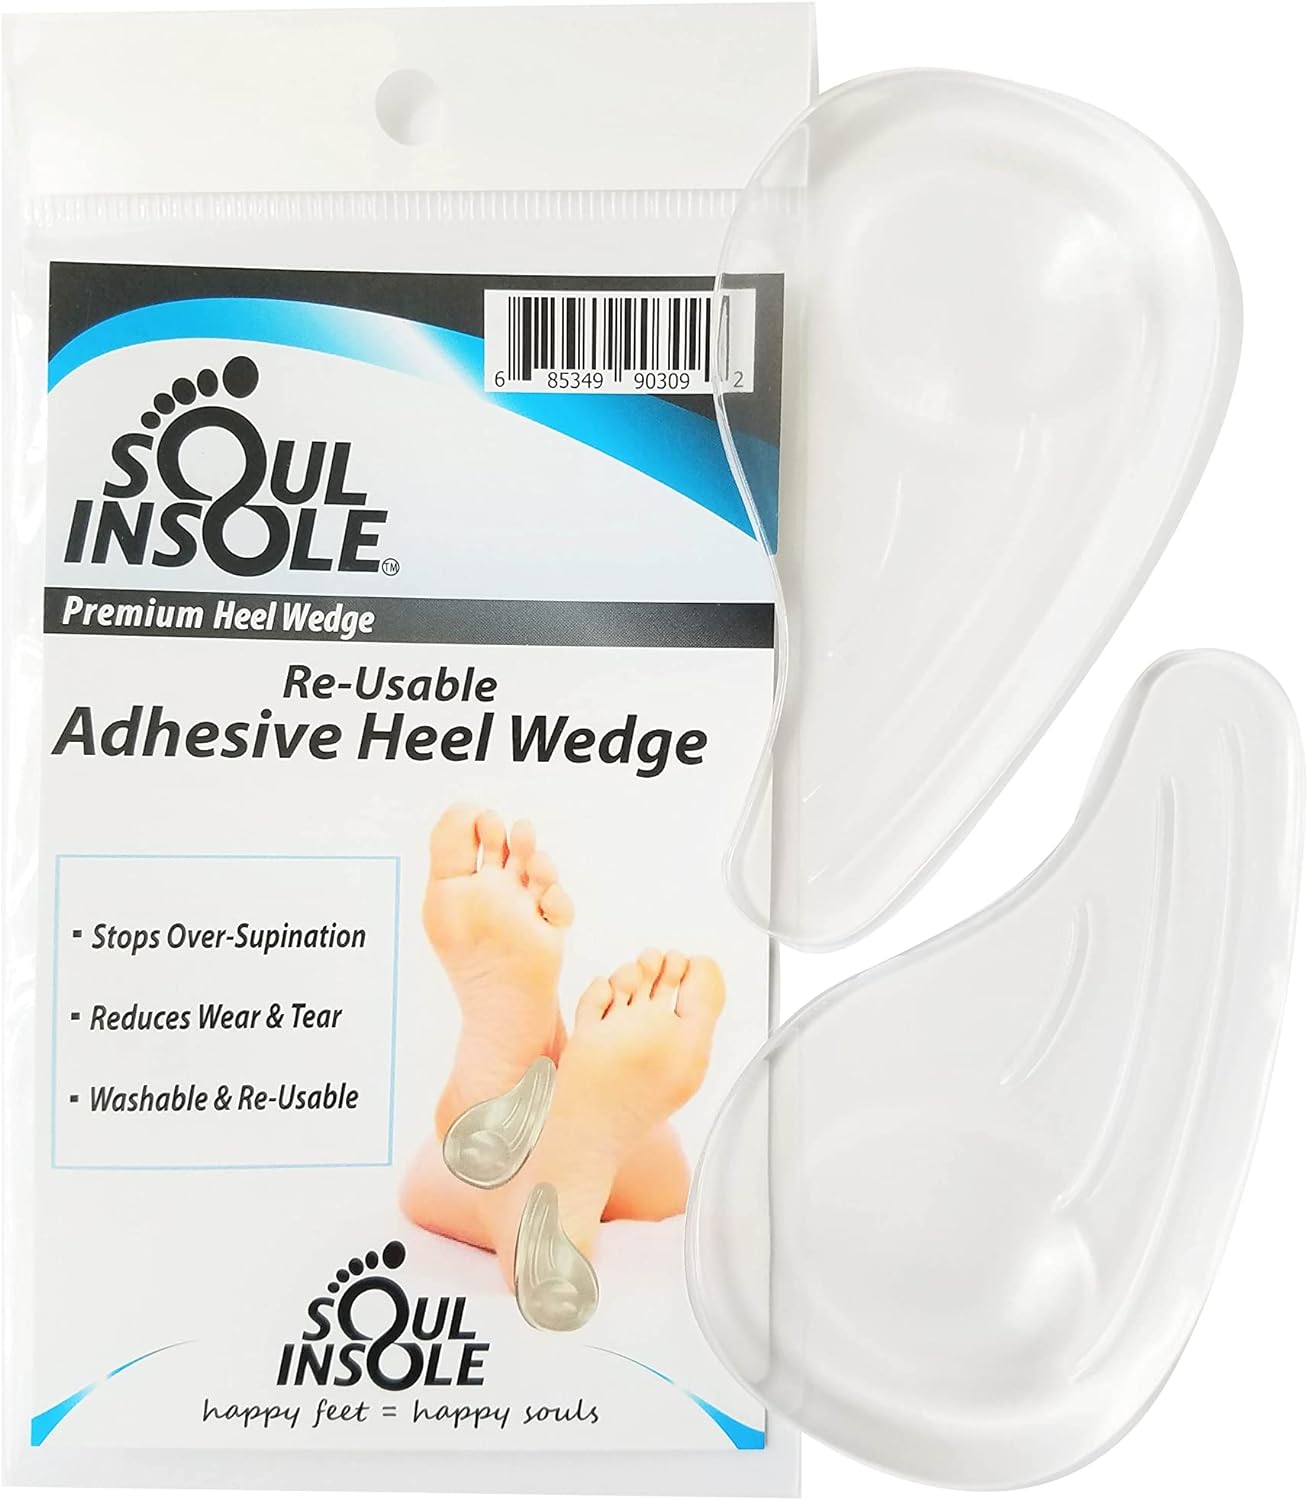 Heel Wedge for Over-Supination/Over-Pronation Re-Usable Adhesive Soul Insole